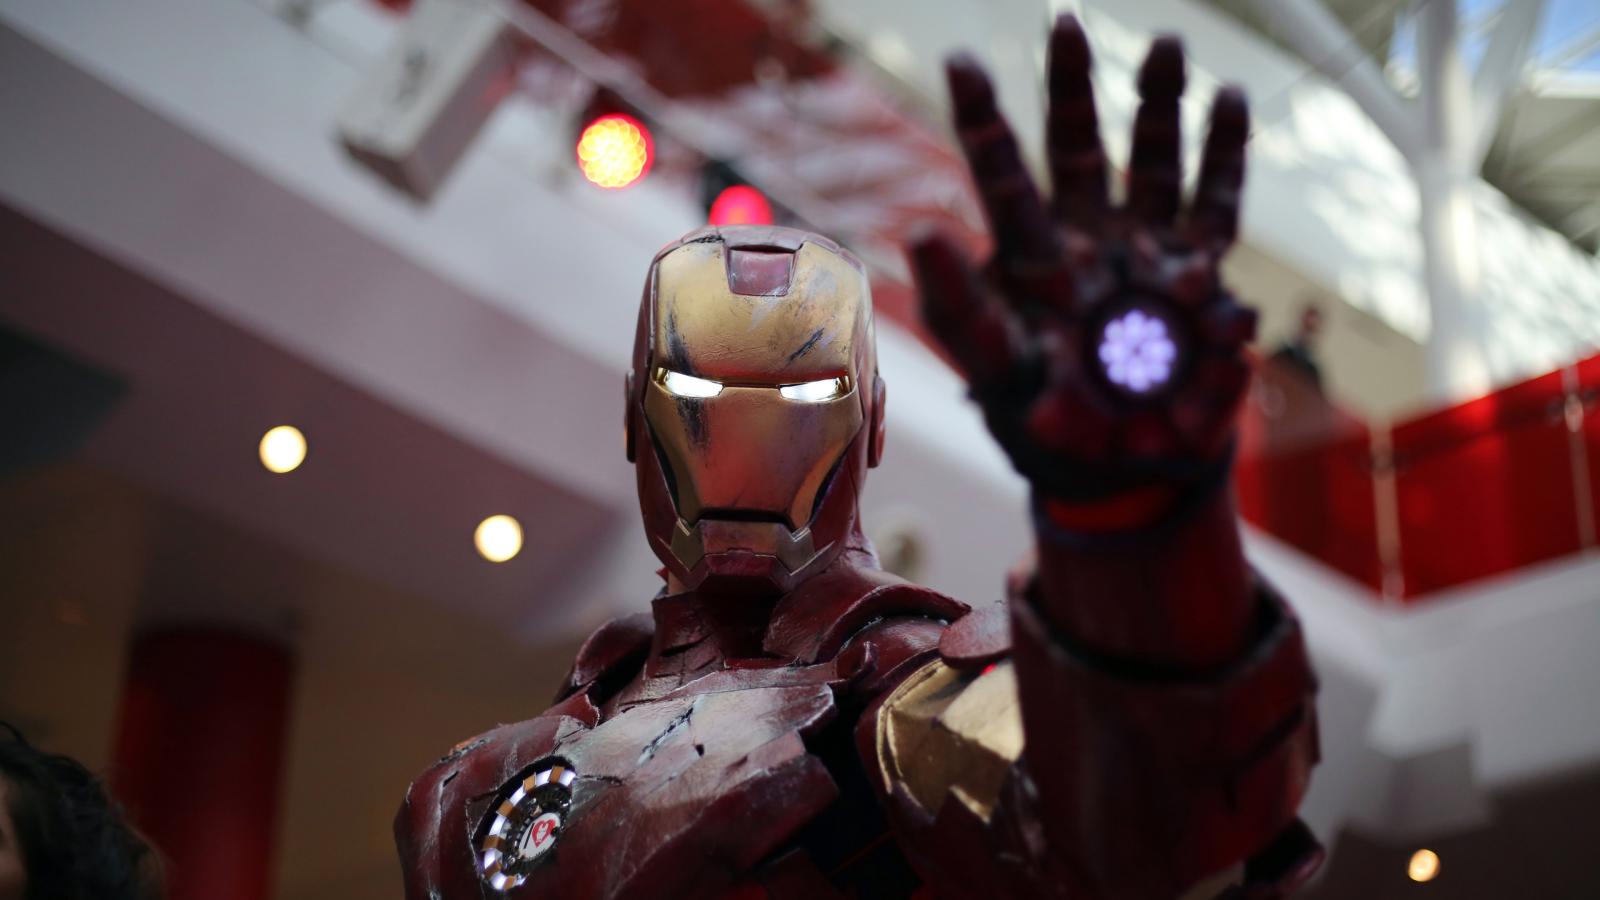 Hyundai Says It's Building An Iron Man Style Wearable Robot Suit